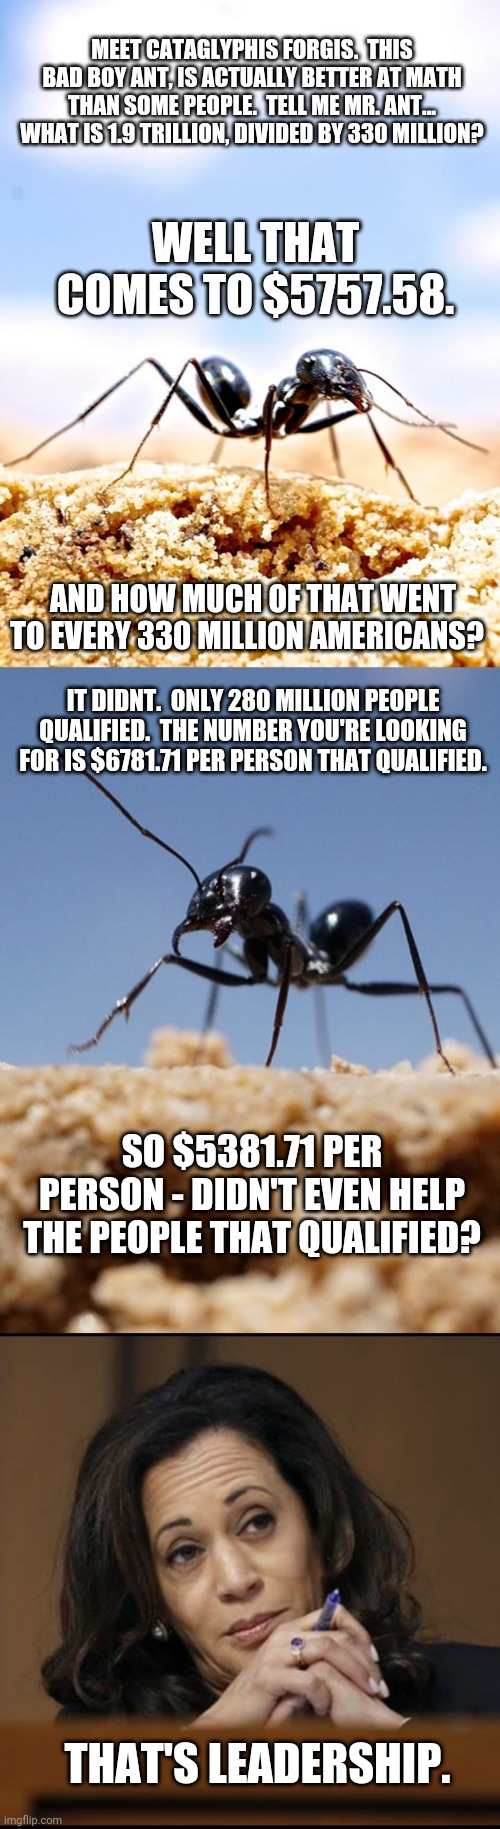 Meet an Ant that can count better than you. | MEET CATAGLYPHIS FORGIS.  THIS BAD BOY ANT, IS ACTUALLY BETTER AT MATH THAN SOME PEOPLE.  TELL ME MR. ANT... WHAT IS 1.9 TRILLION, DIVIDED BY 330 MILLION? WELL THAT COMES TO $5757.58. AND HOW MUCH OF THAT WENT TO EVERY 330 MILLION AMERICANS? IT DIDNT.  ONLY 280 MILLION PEOPLE QUALIFIED.  THE NUMBER YOU'RE LOOKING FOR IS $6781.71 PER PERSON THAT QUALIFIED. SO $5381.71 PER PERSON - DIDN'T EVEN HELP THE PEOPLE THAT QUALIFIED? THAT'S LEADERSHIP. | image tagged in kamala harris,insects,politics lol | made w/ Imgflip meme maker